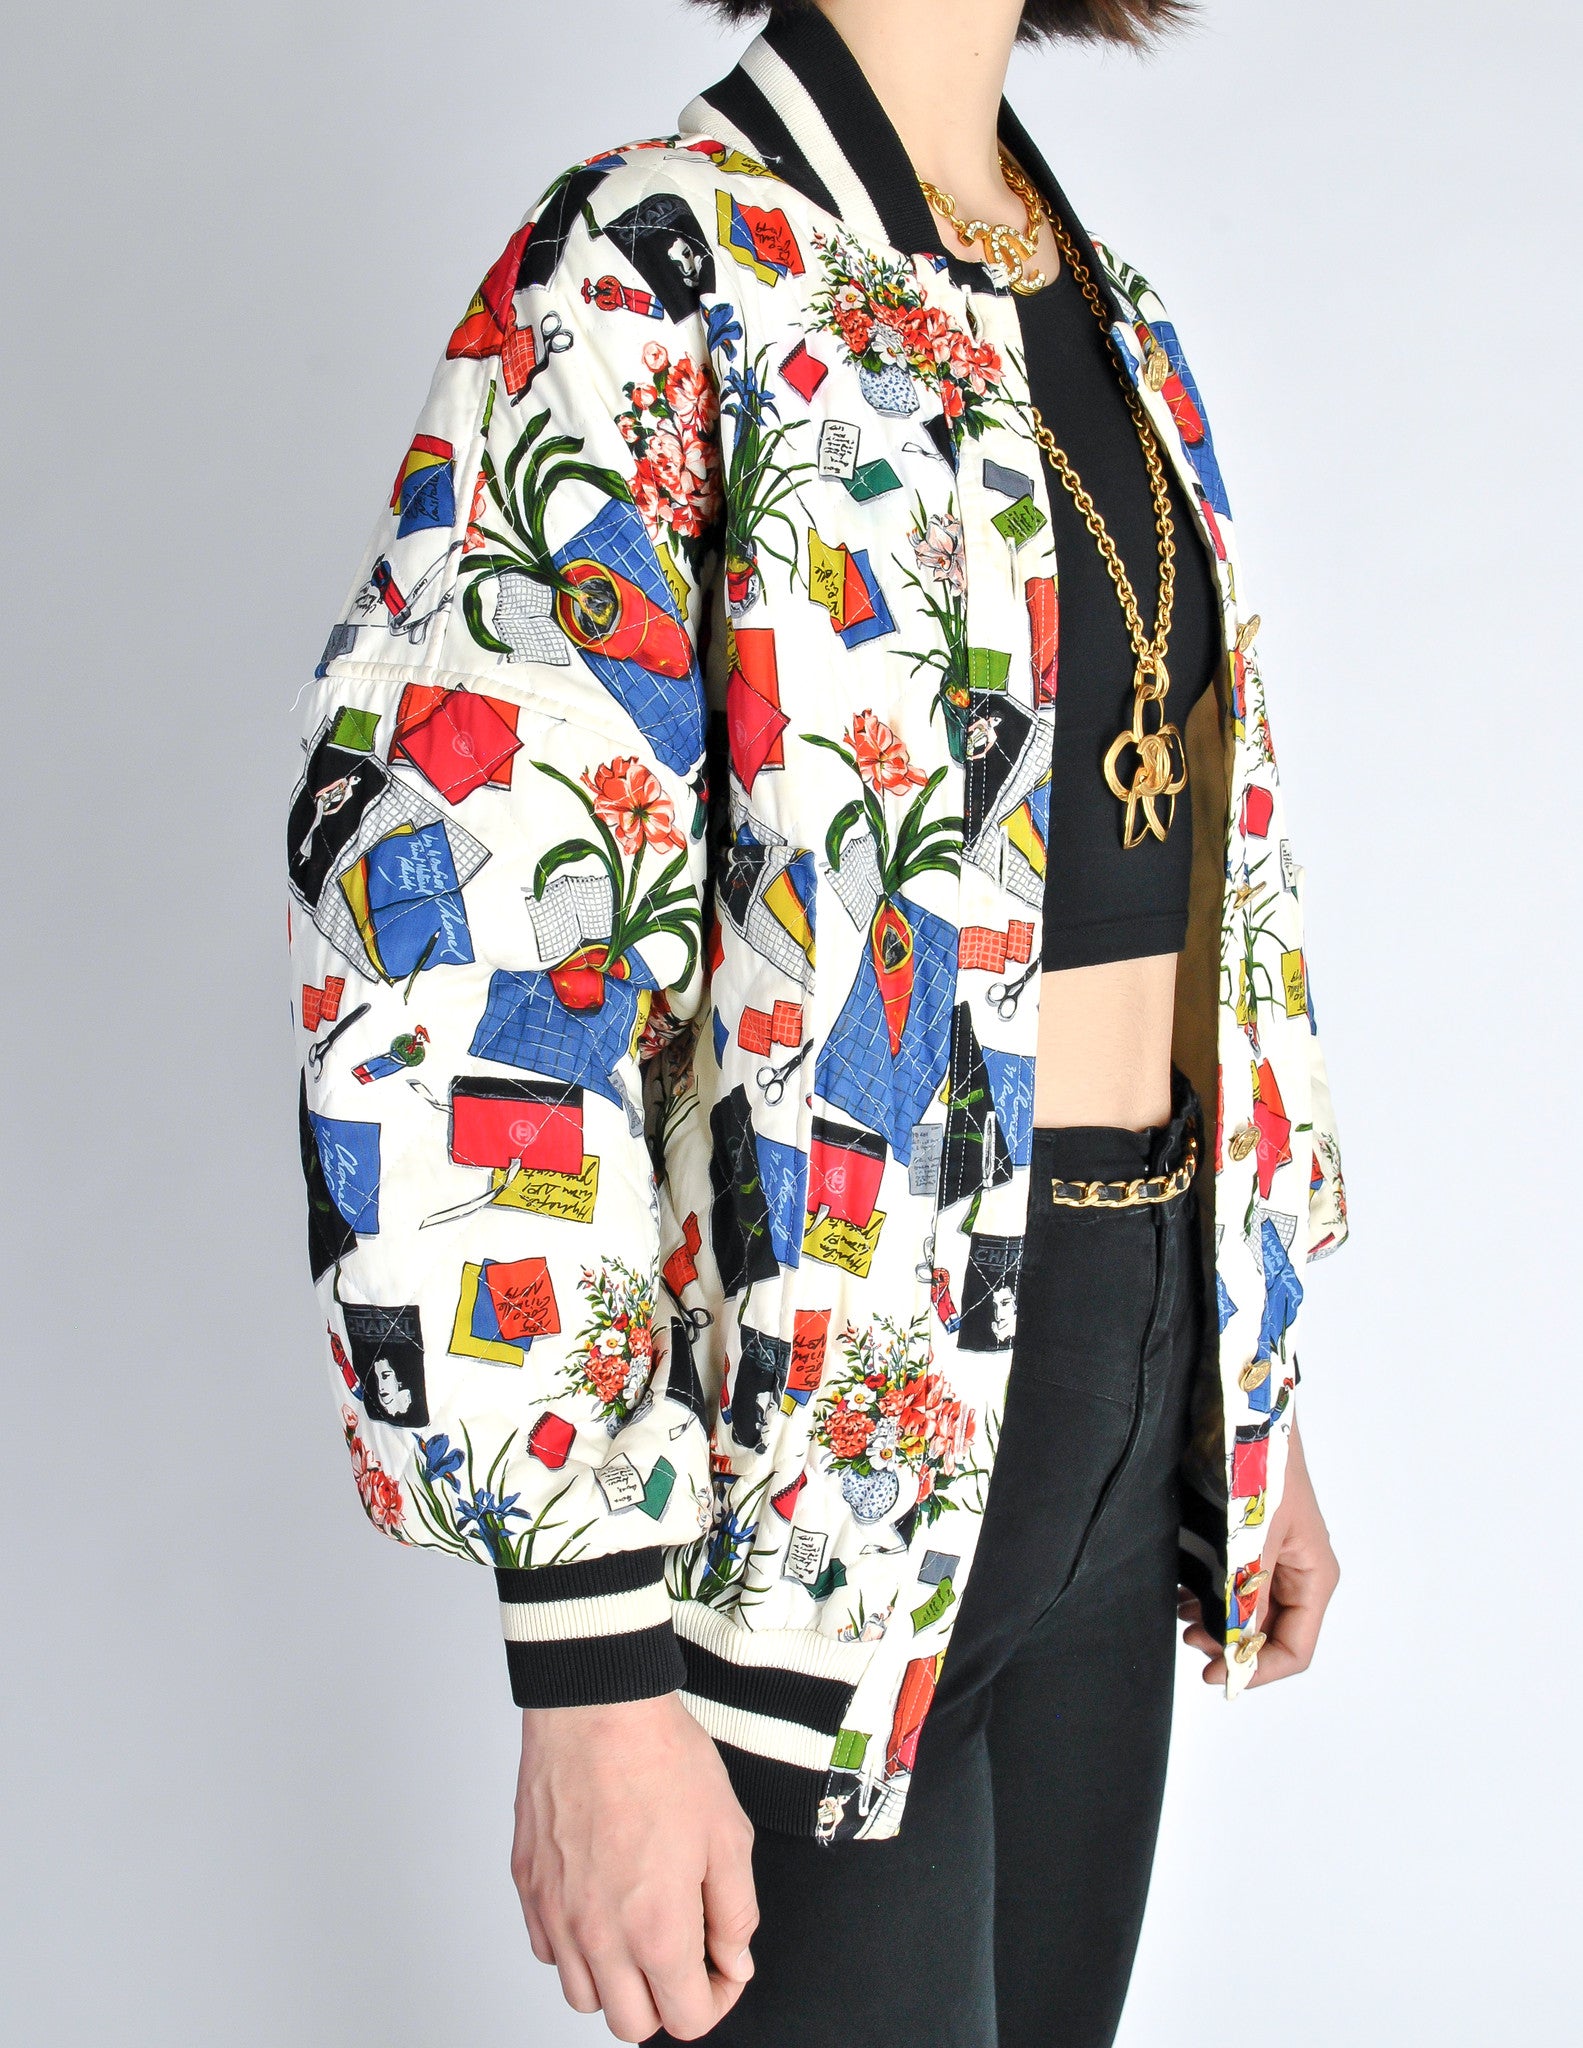 Chanel Vintage Novelty Print Quilted Bomber Jacket - from Amarcord ...